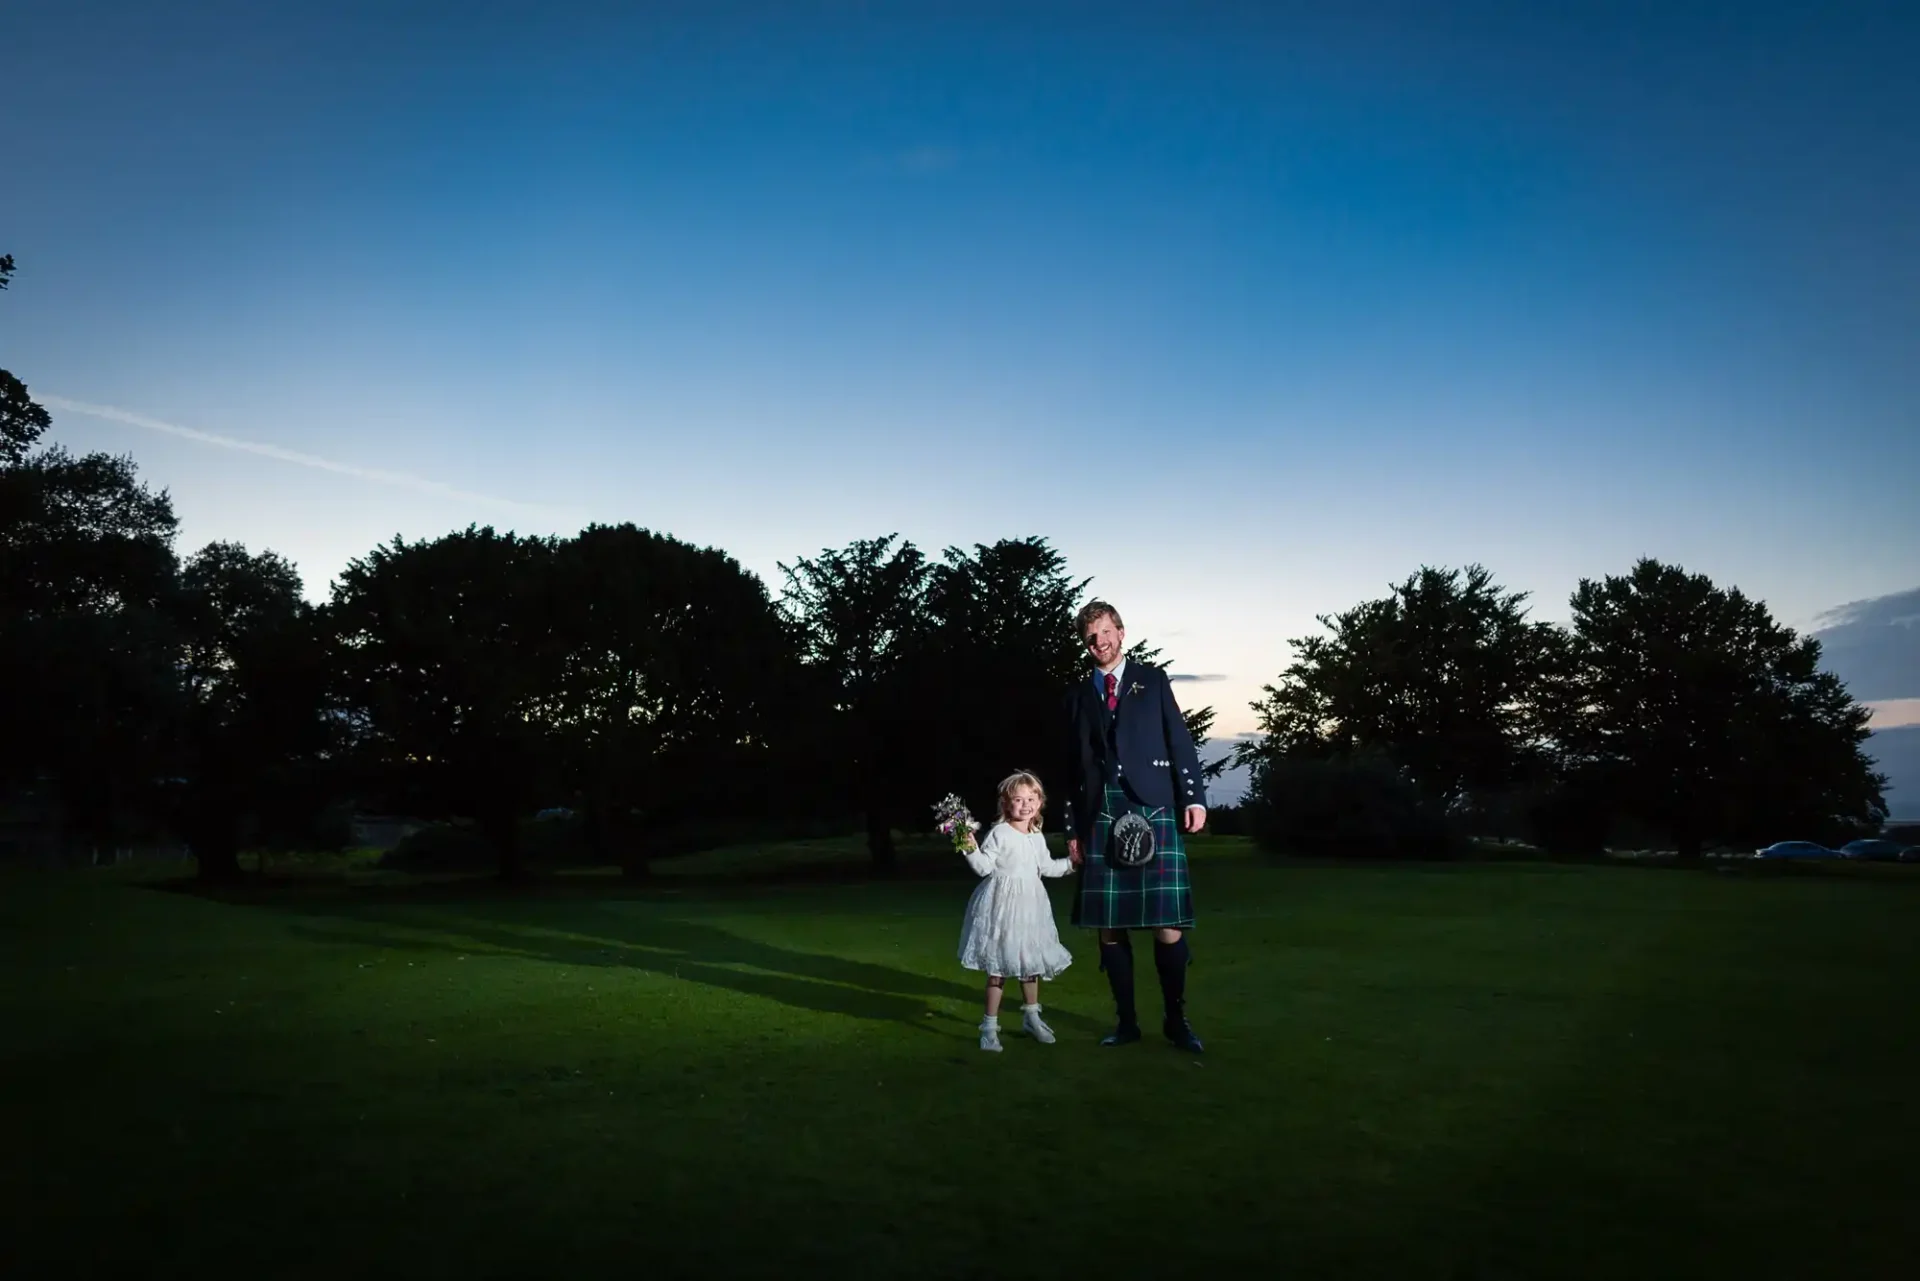 A man in a kilt and a young girl in a white dress standing on a grassy field under a twilight sky.